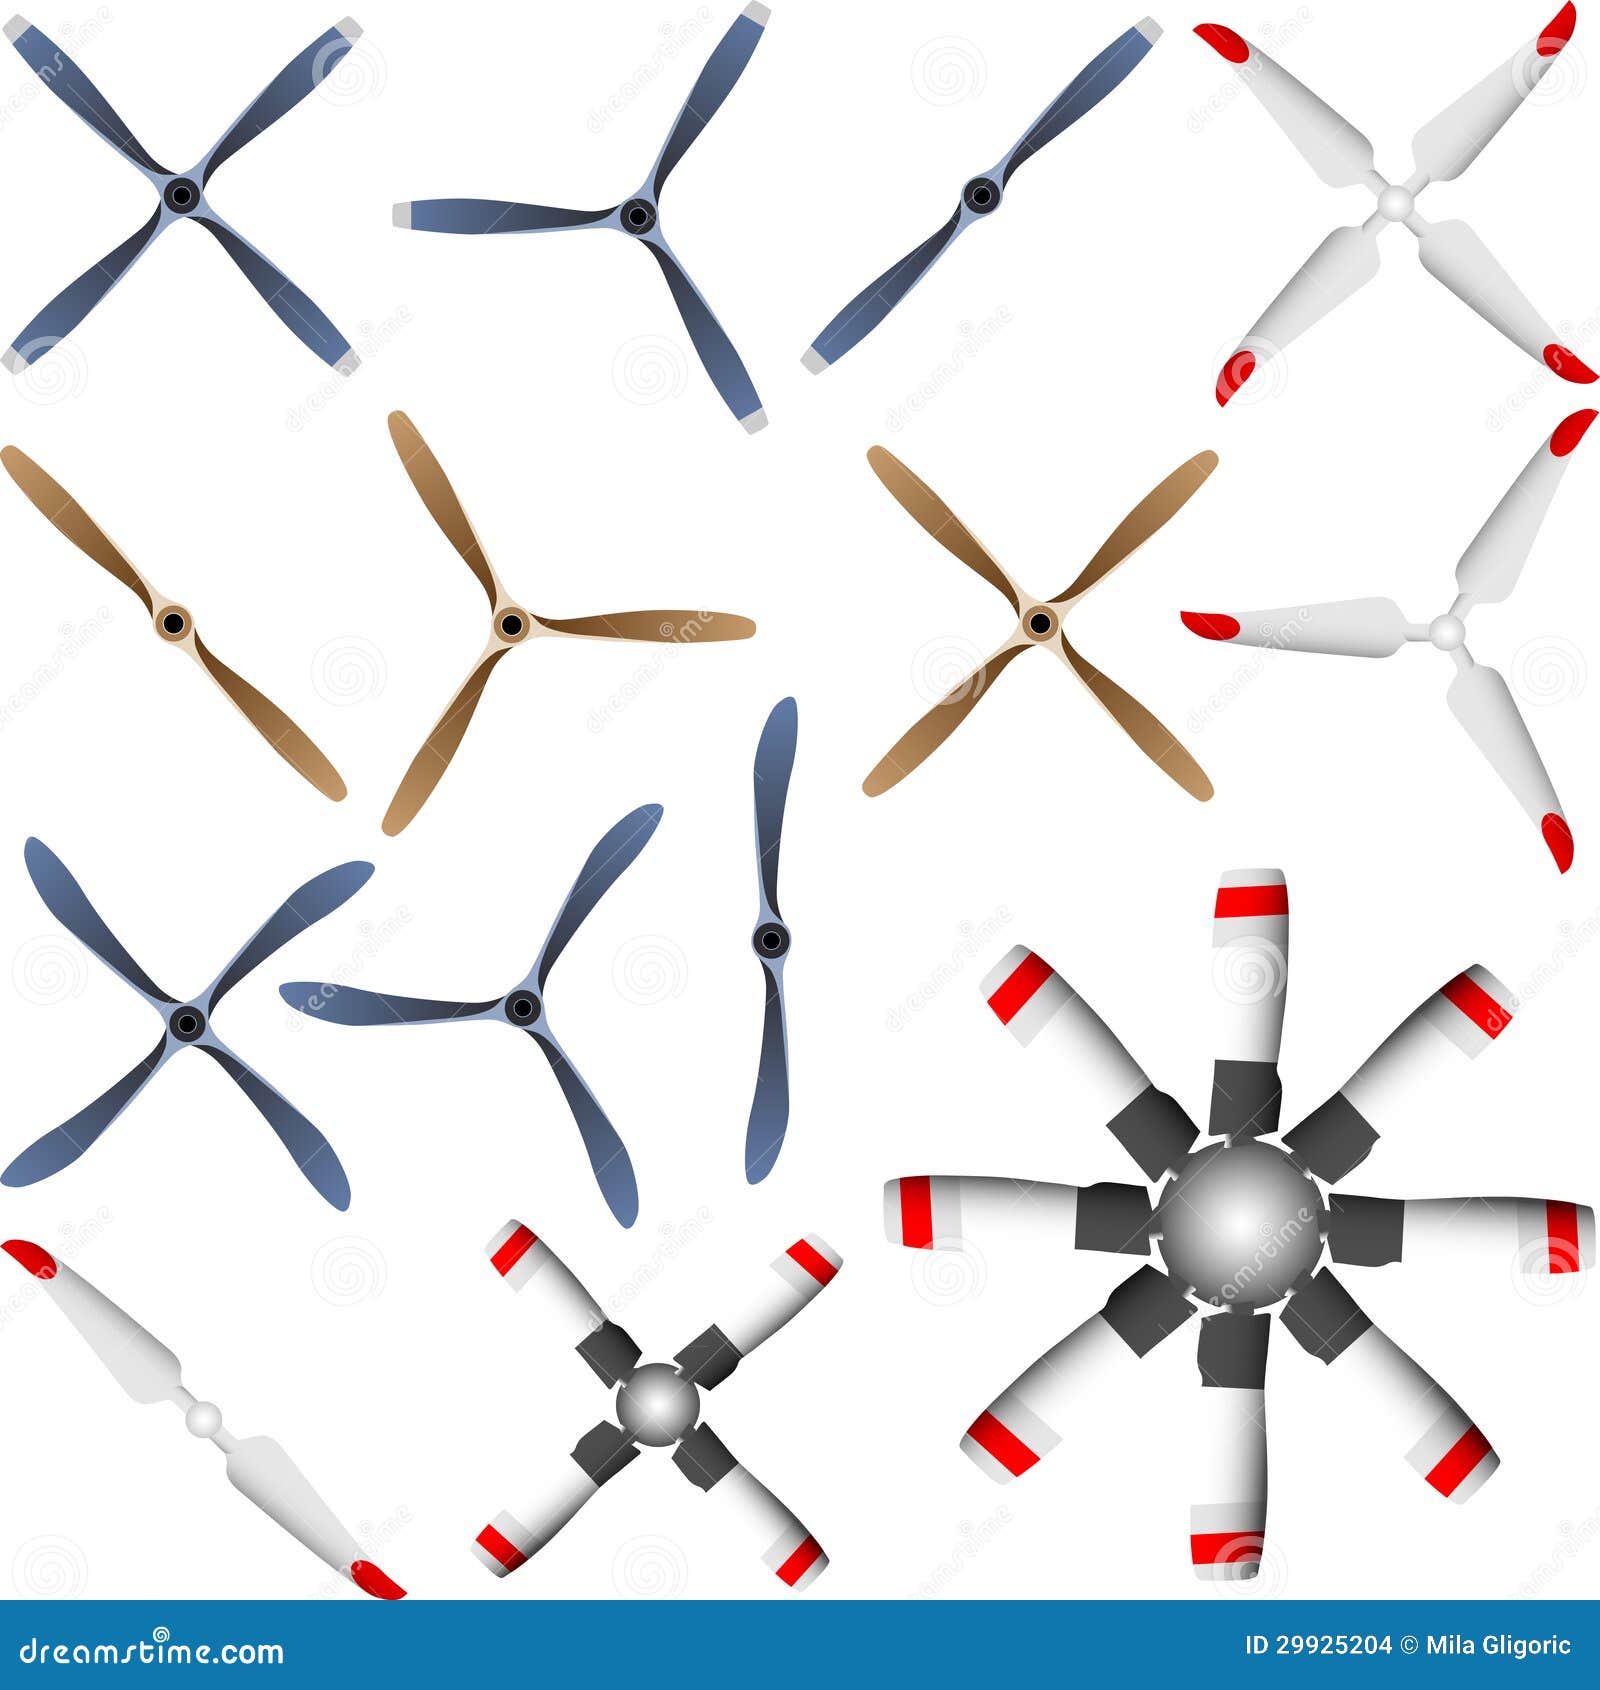 airplane propeller clipart - photo #30